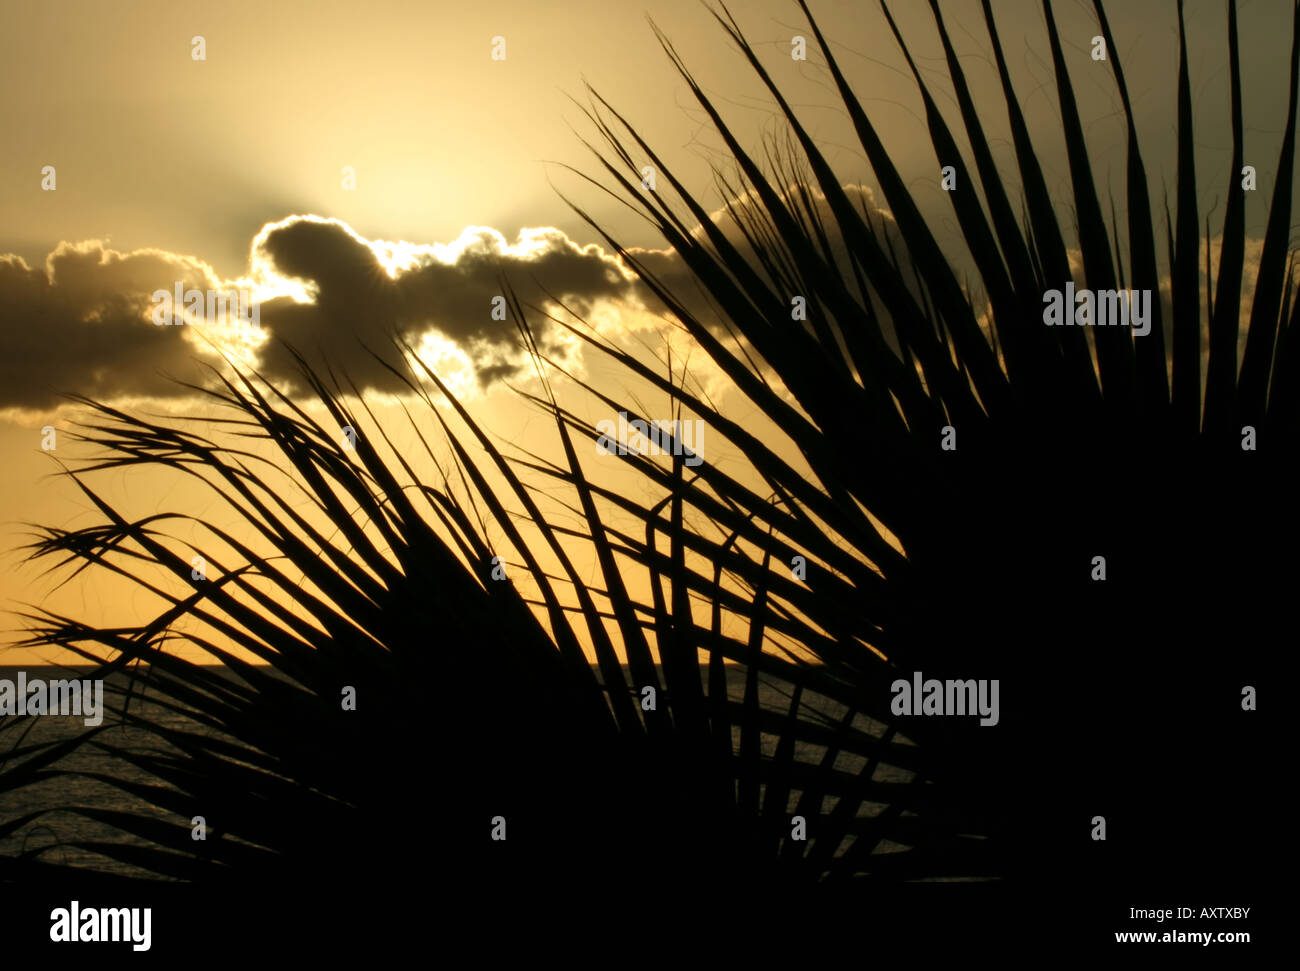 Evening background: palm trees silhouetted at sunset (Tenerife, Canary Islands, Spain) Stock Photo